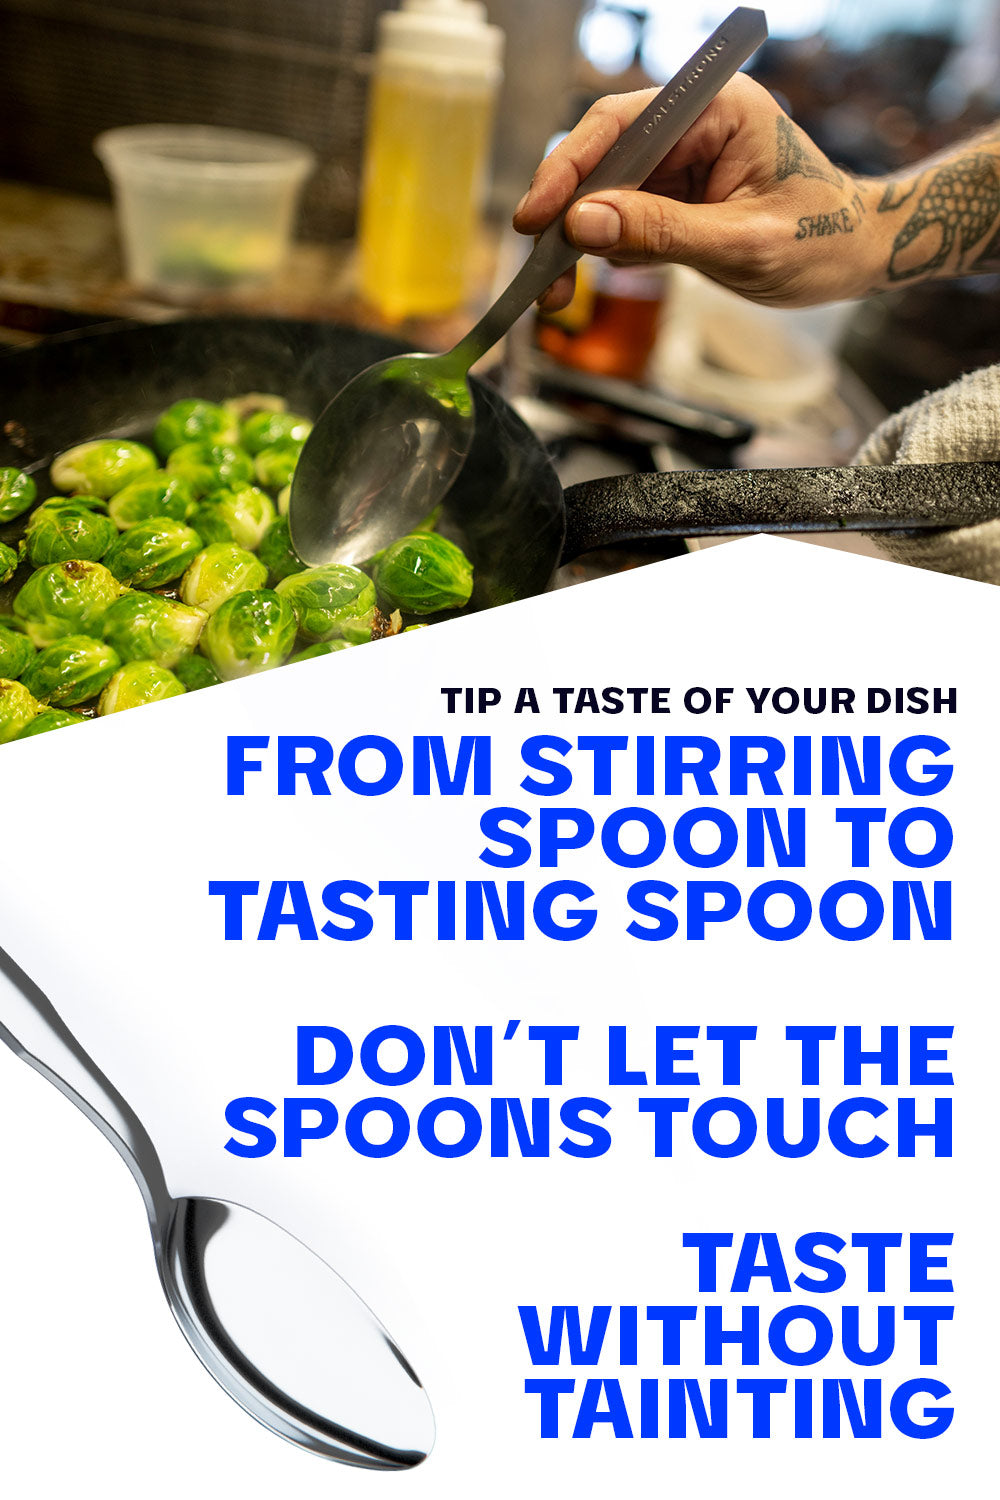 Dalstrong professional chef tasting and plating spoon featuring it's uses.